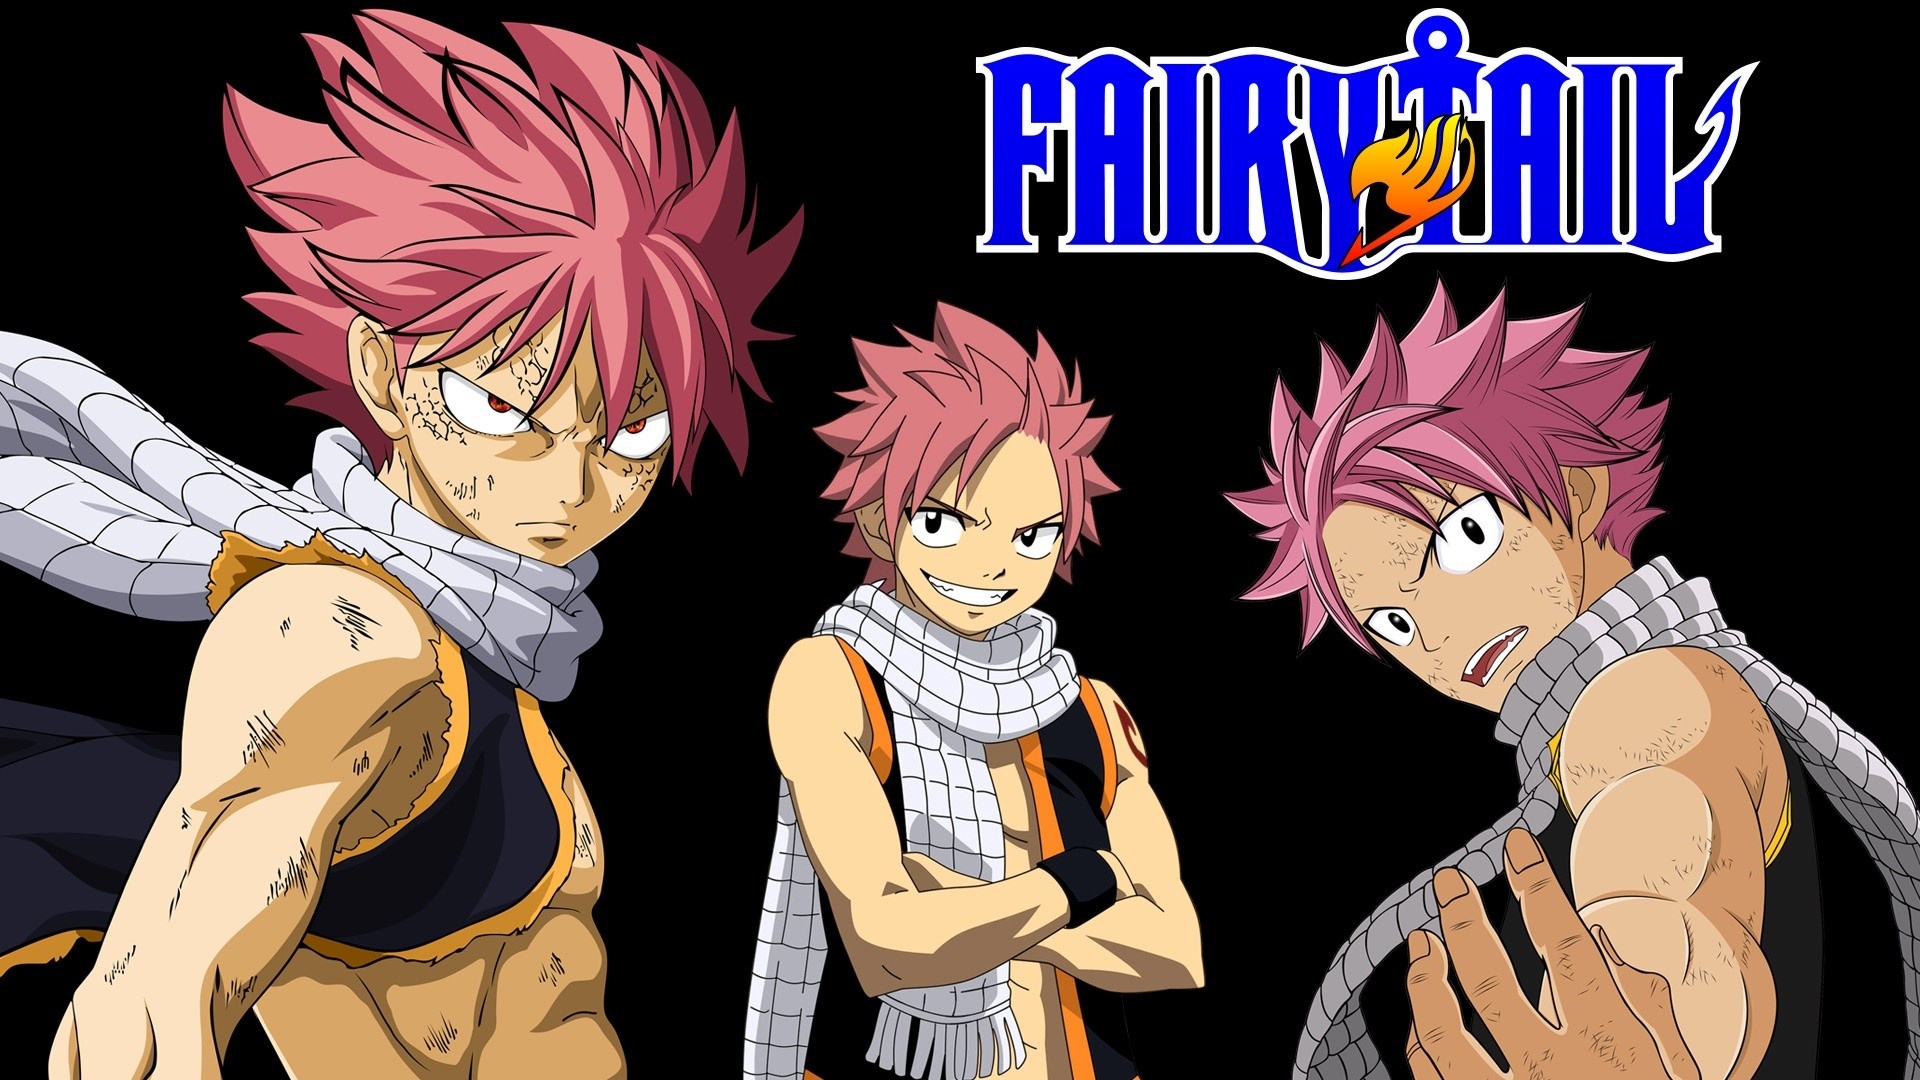 Natsu (Fairy Tail): Ranked second in a popularity poll published in the 26th issue of Weekly Shonen Magazine. 1920x1080 Full HD Background.